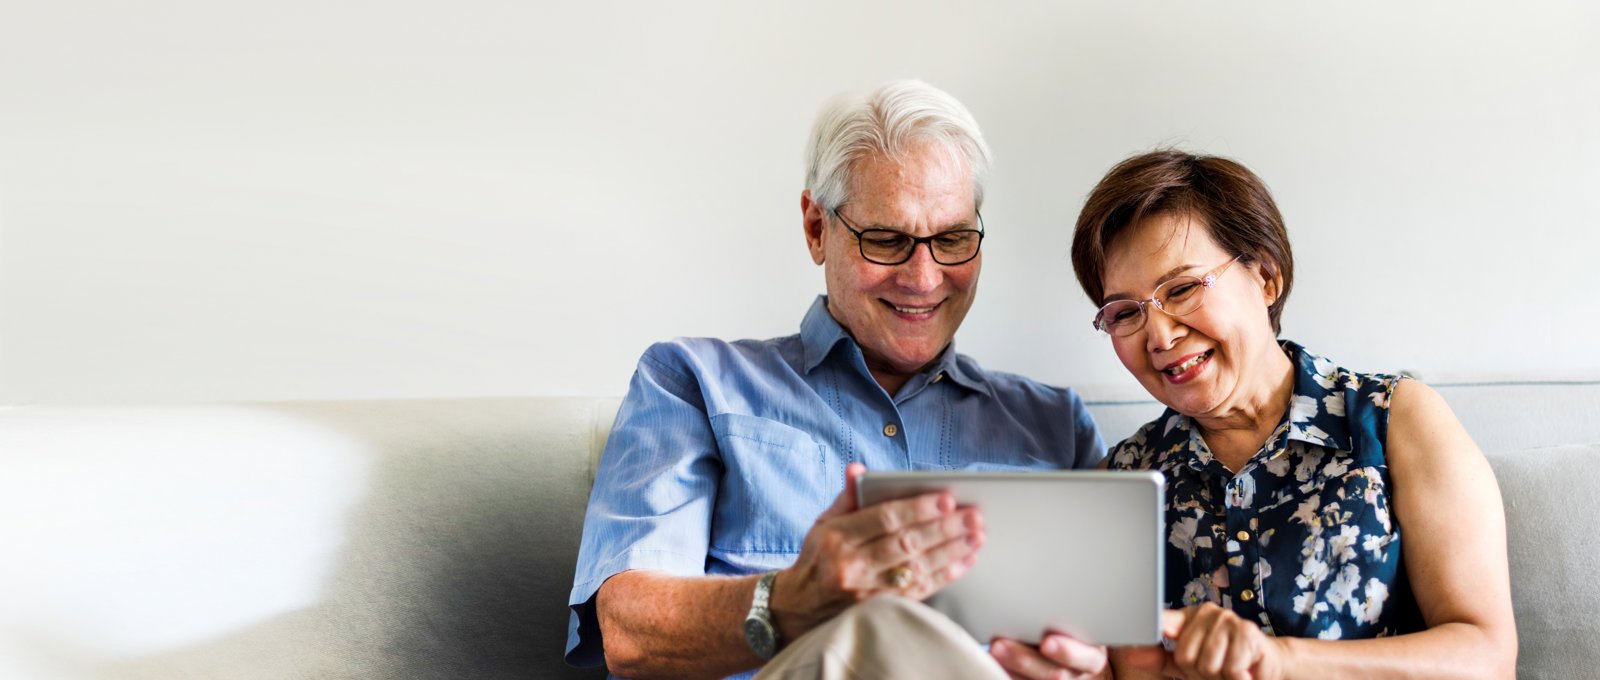 Photo of an older couple using a tablet in their living room. Man is to the left, he's got white hair, glasses and wearing a blue shirt with cream trousers. Women is to the right, she has short brown hair, glasses and wearing a blue, flowery shirt. The man is holding the silver tablet while the woman is pointing at it, while they're sat on a cream sofa with a white/cream wall behind them.